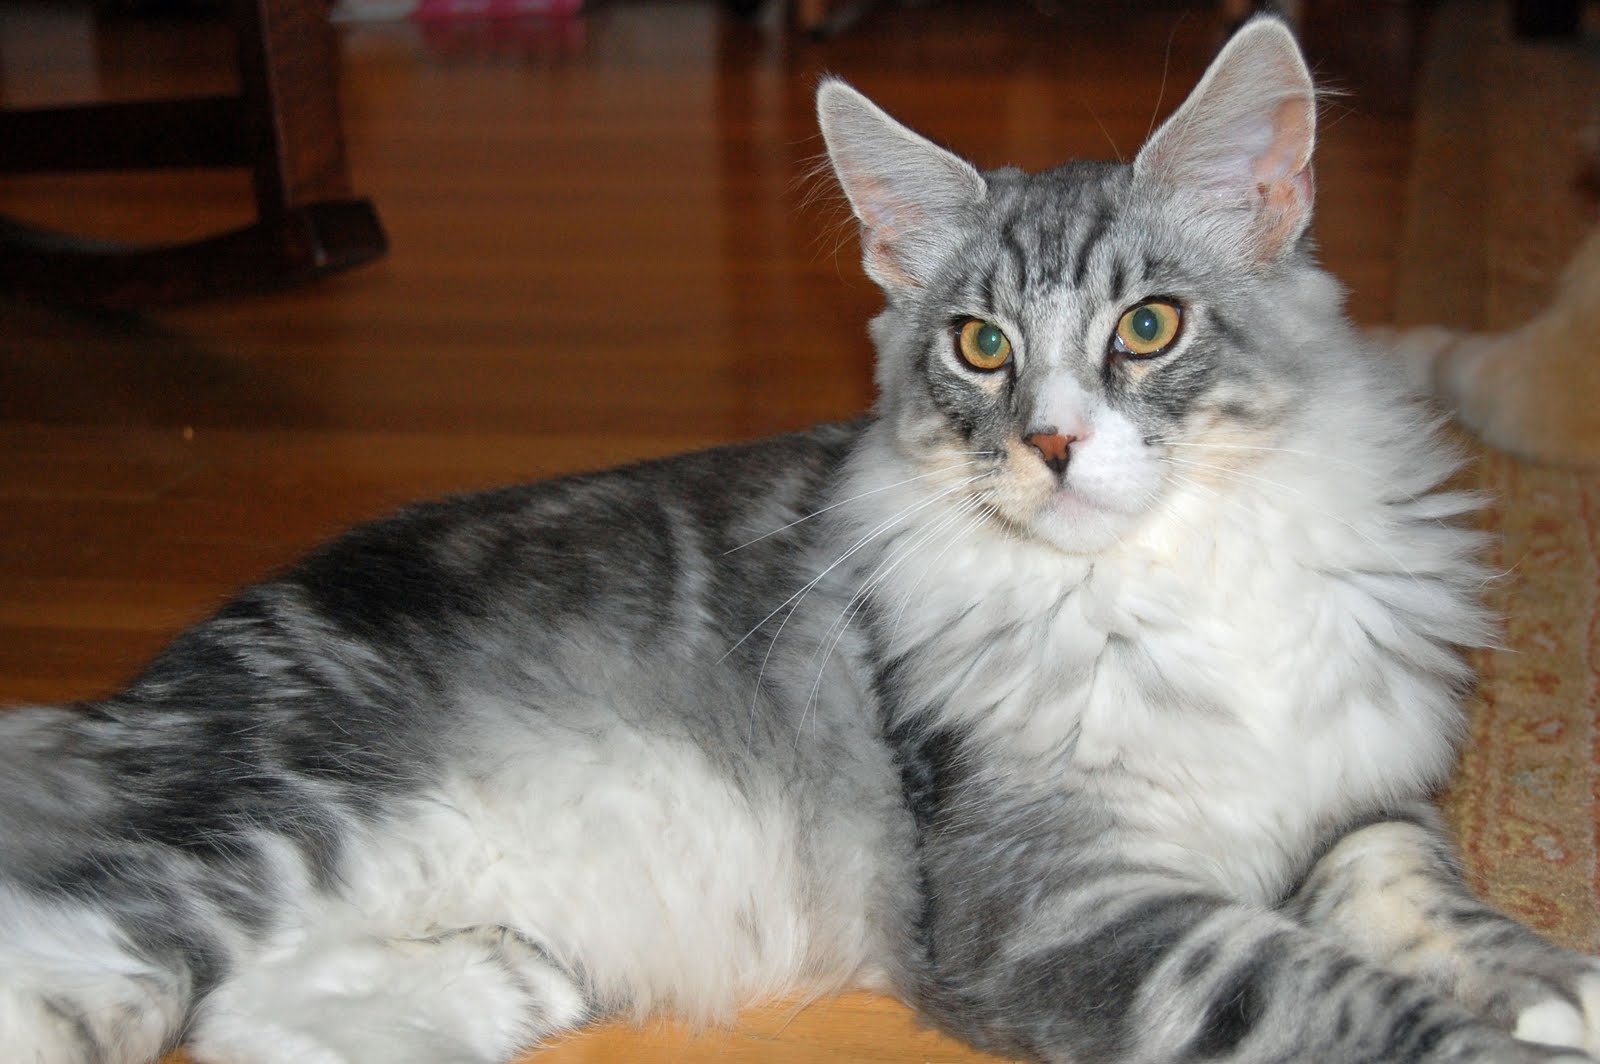 thewildhare: Maine Coon Cats